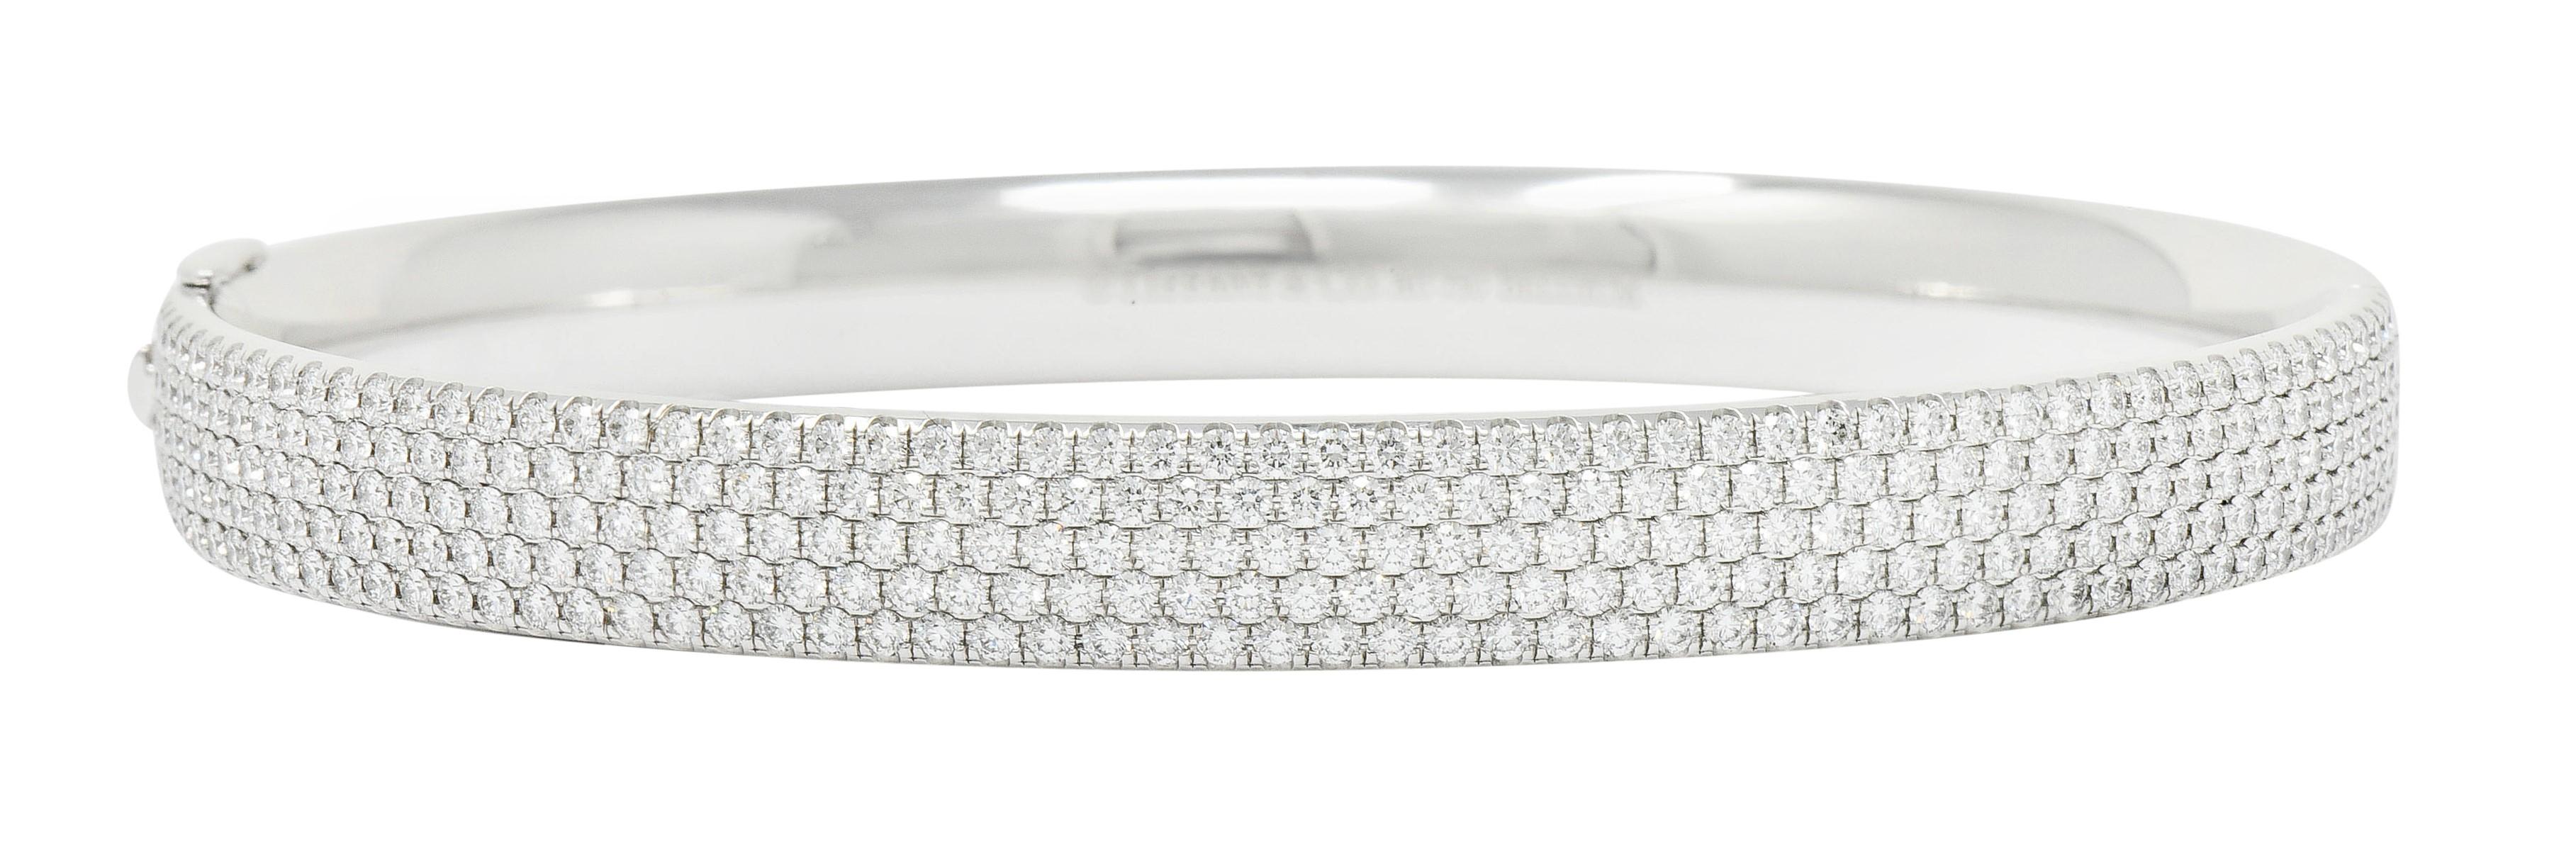 Hinged bangle bracelet features five rows of round brilliant cut melee diamonds

Pavè set to front and weighing approximately 4.96 carats; F/G color and VS clarity

Completes as a concealed clasp with a fold-over safety

Stamped Au750 for 18 karat